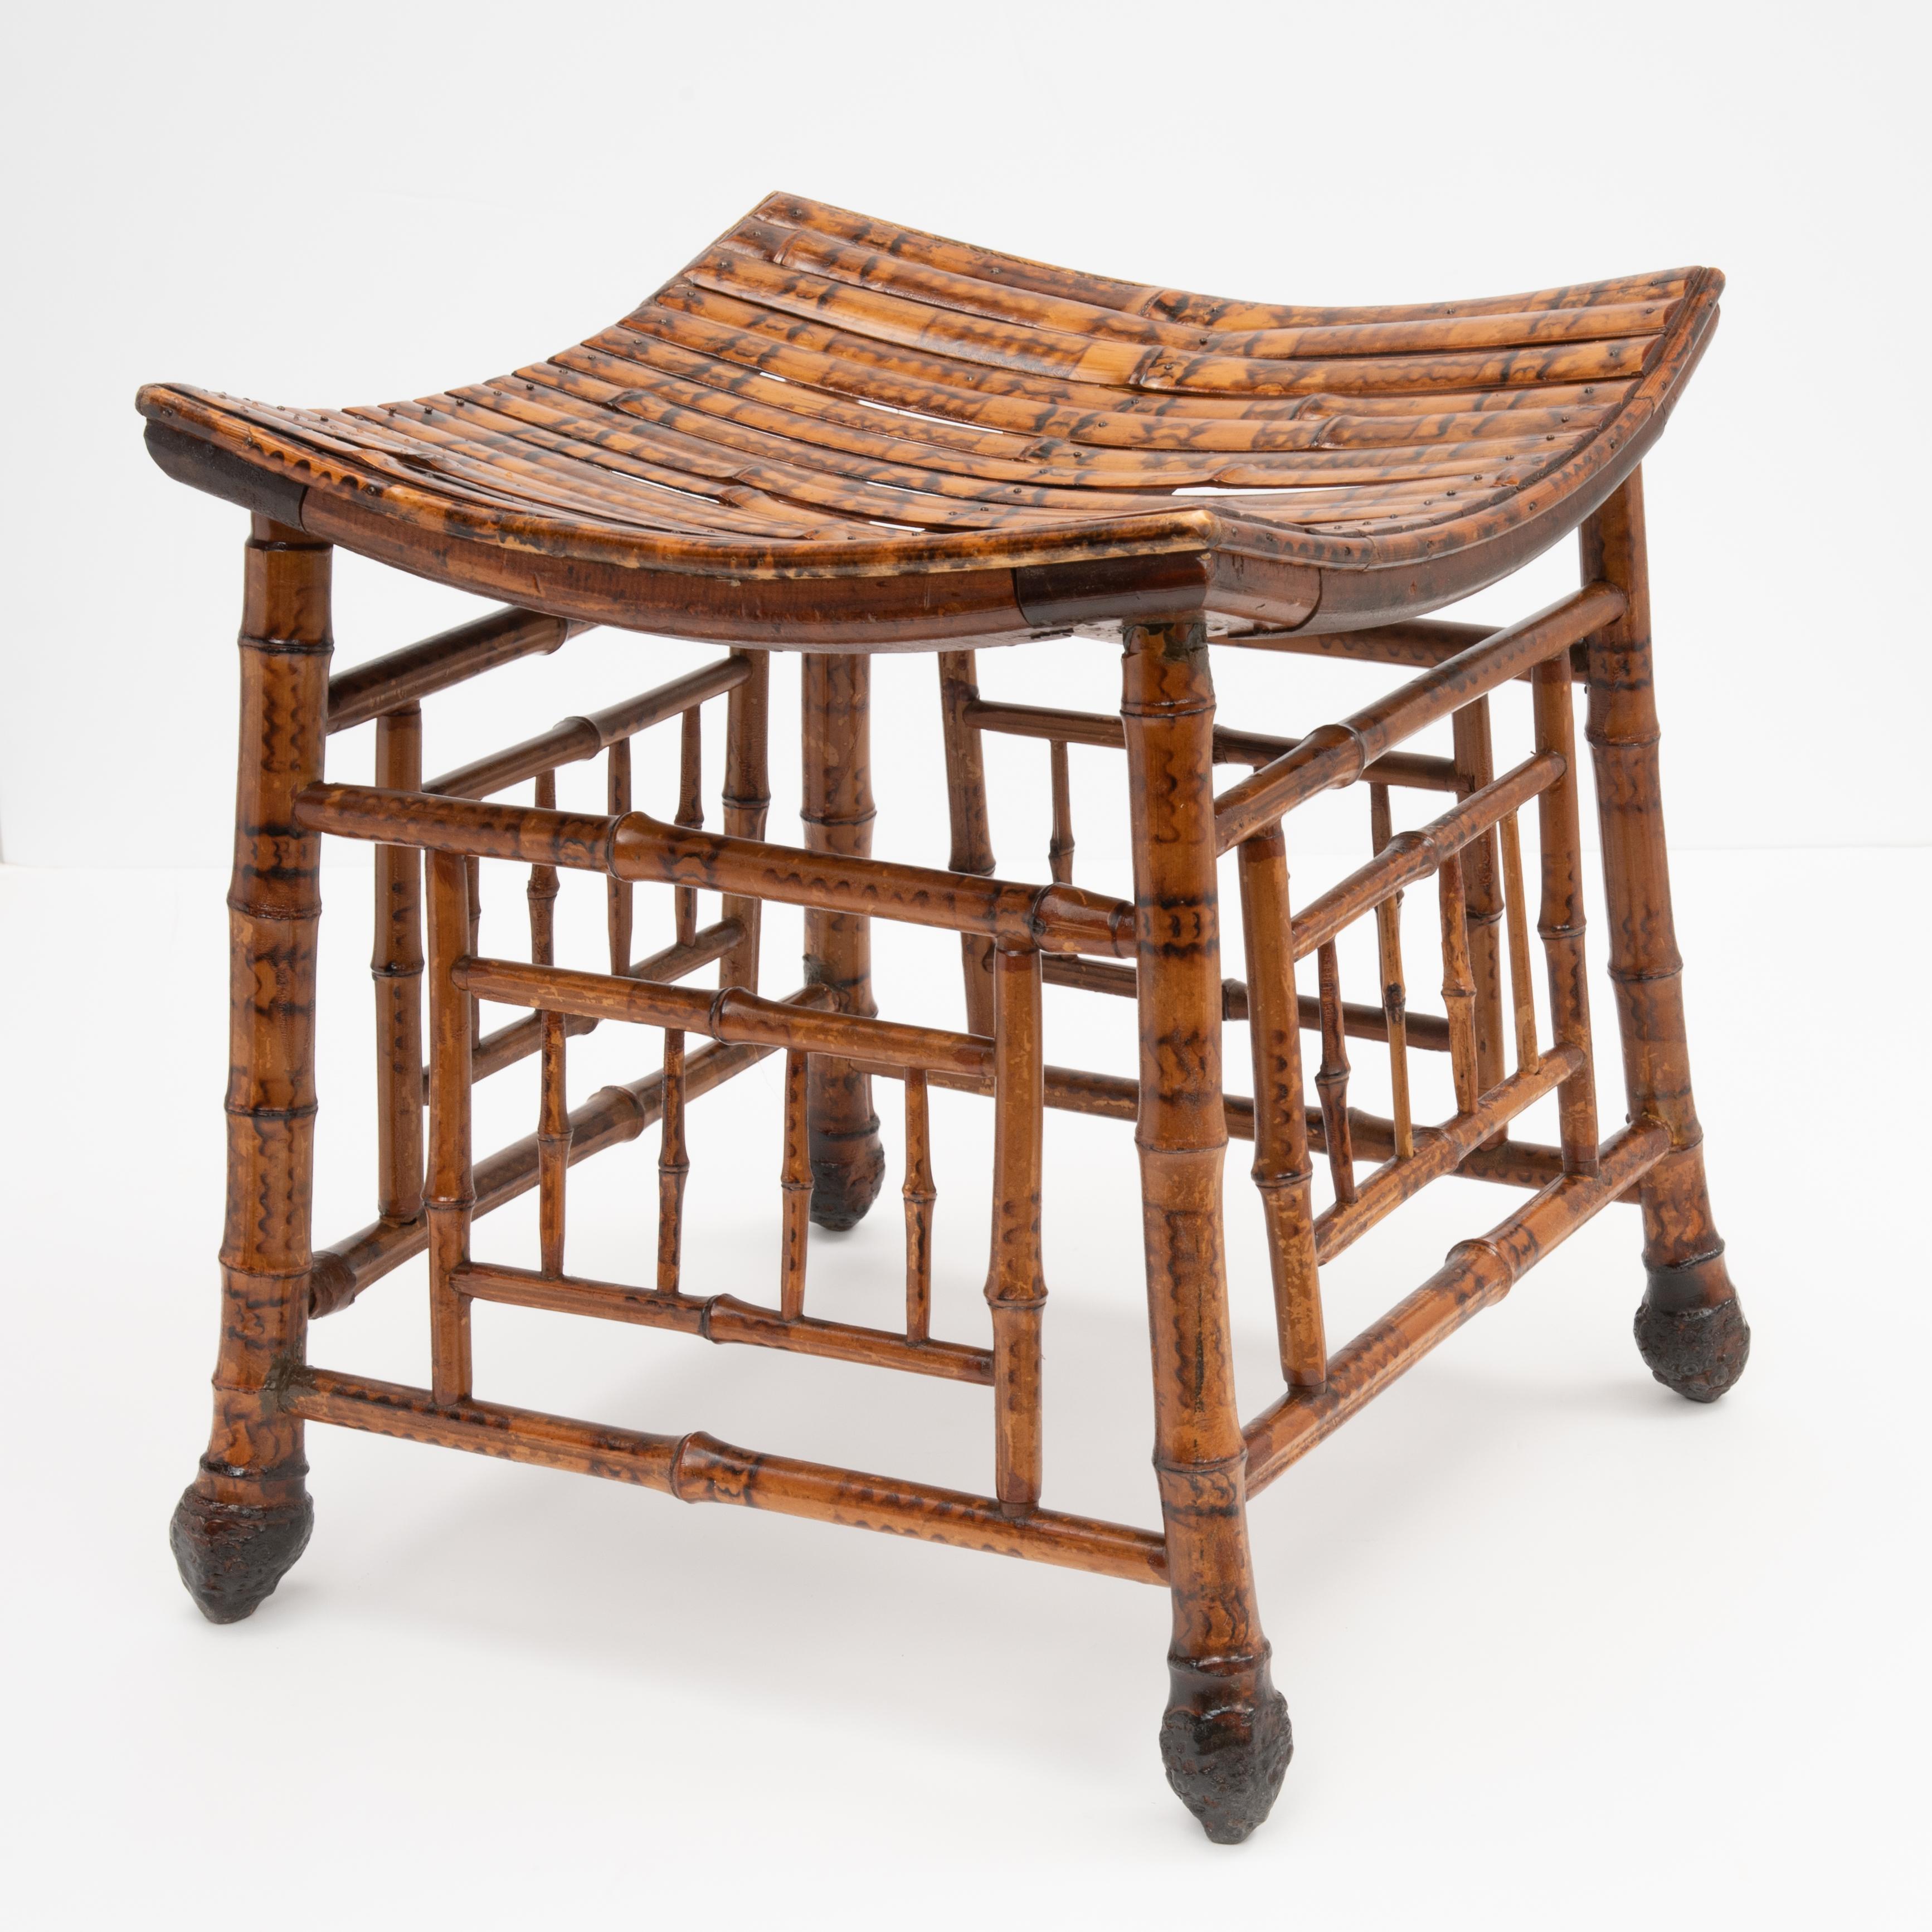 An English Egyptian Revival bamboo Thebes stool from the early 1900s, with slatted curving seat and root bamboo legs.